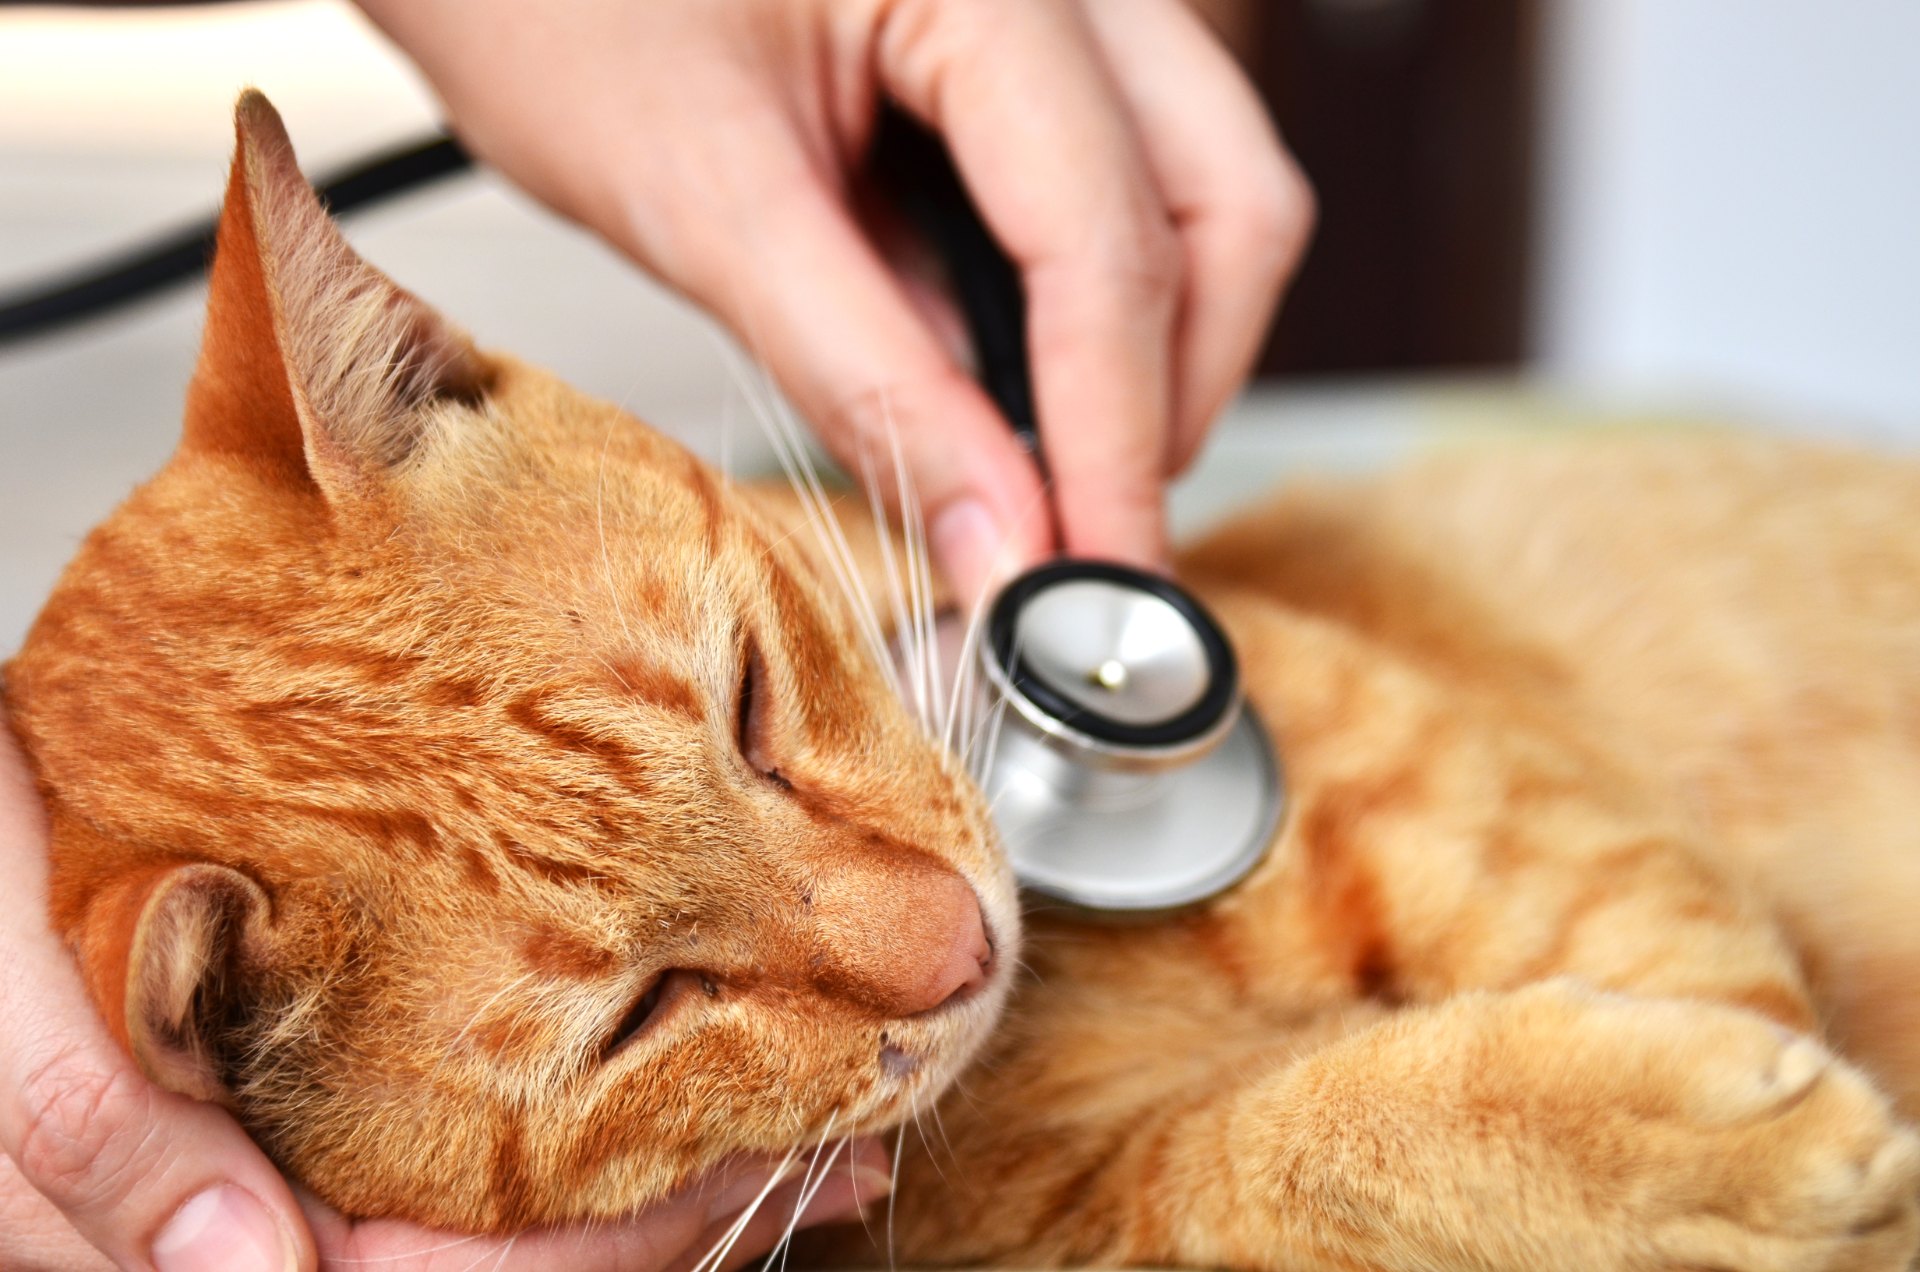 Cat being checked by a vet with a stethoscope